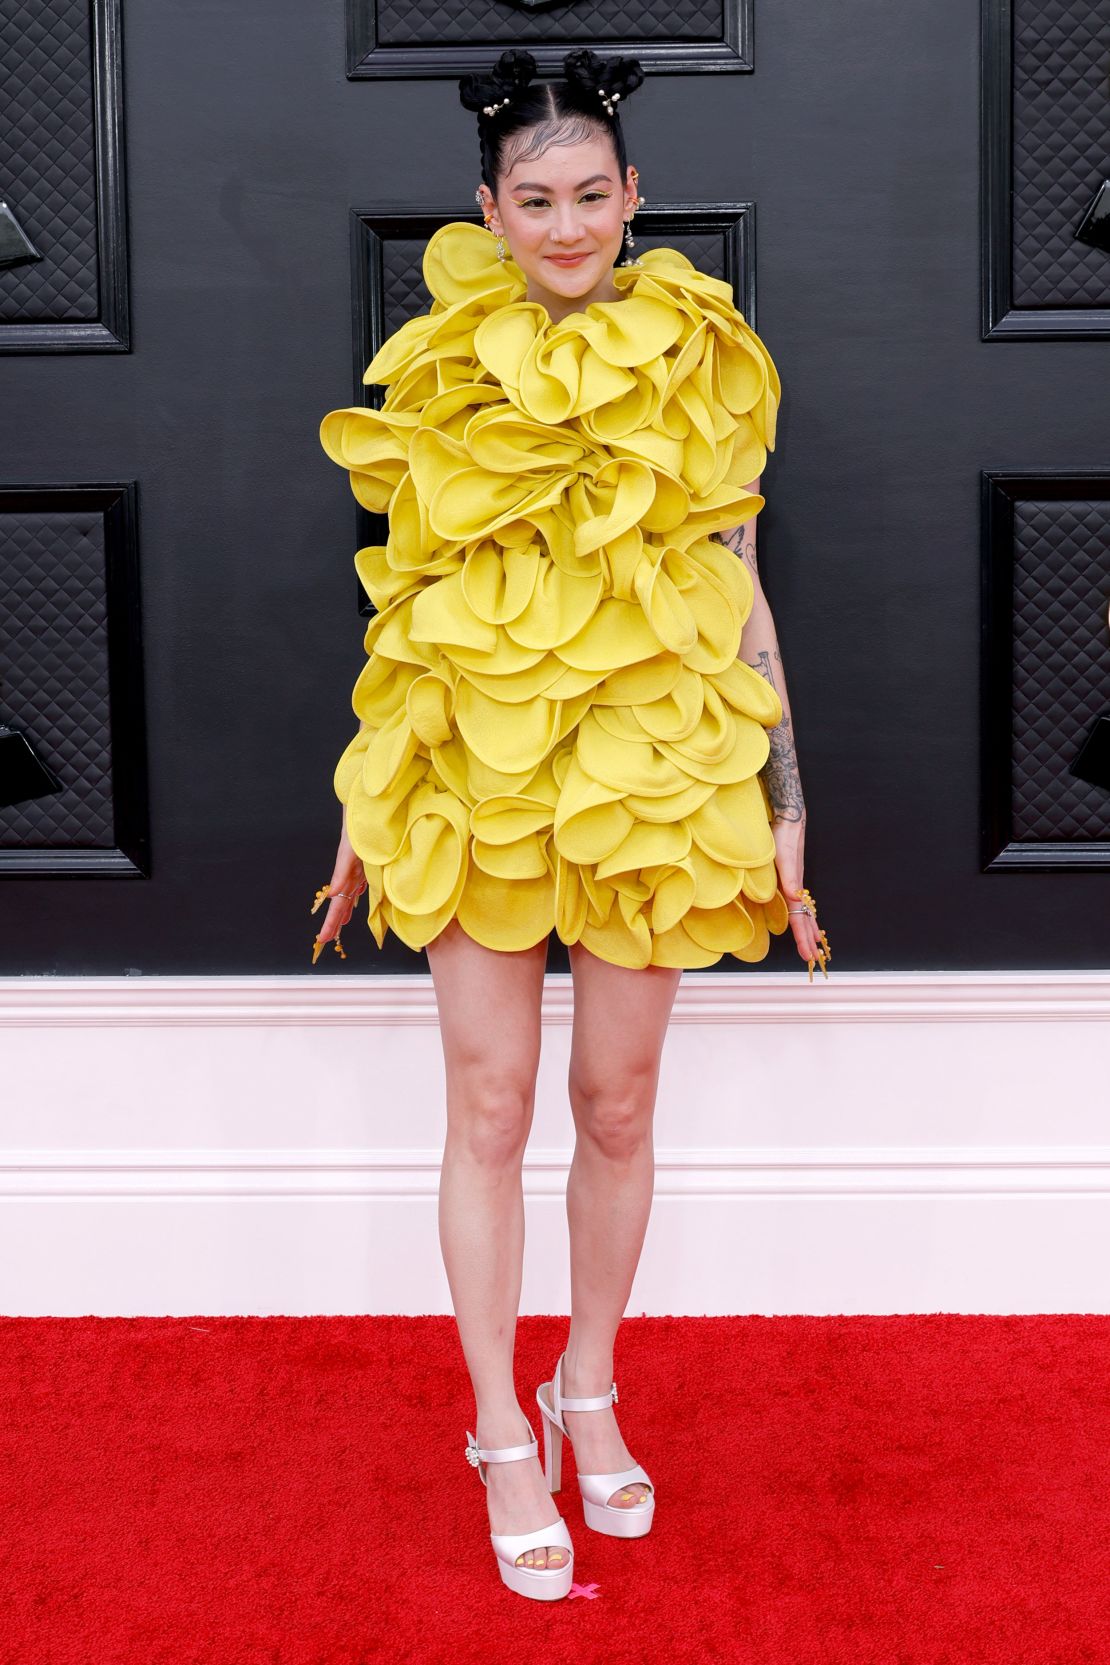 Michelle Zauner of Japanese Breakfast wore a bright yellow Valentino dress, completing the look with elaborate nail art.